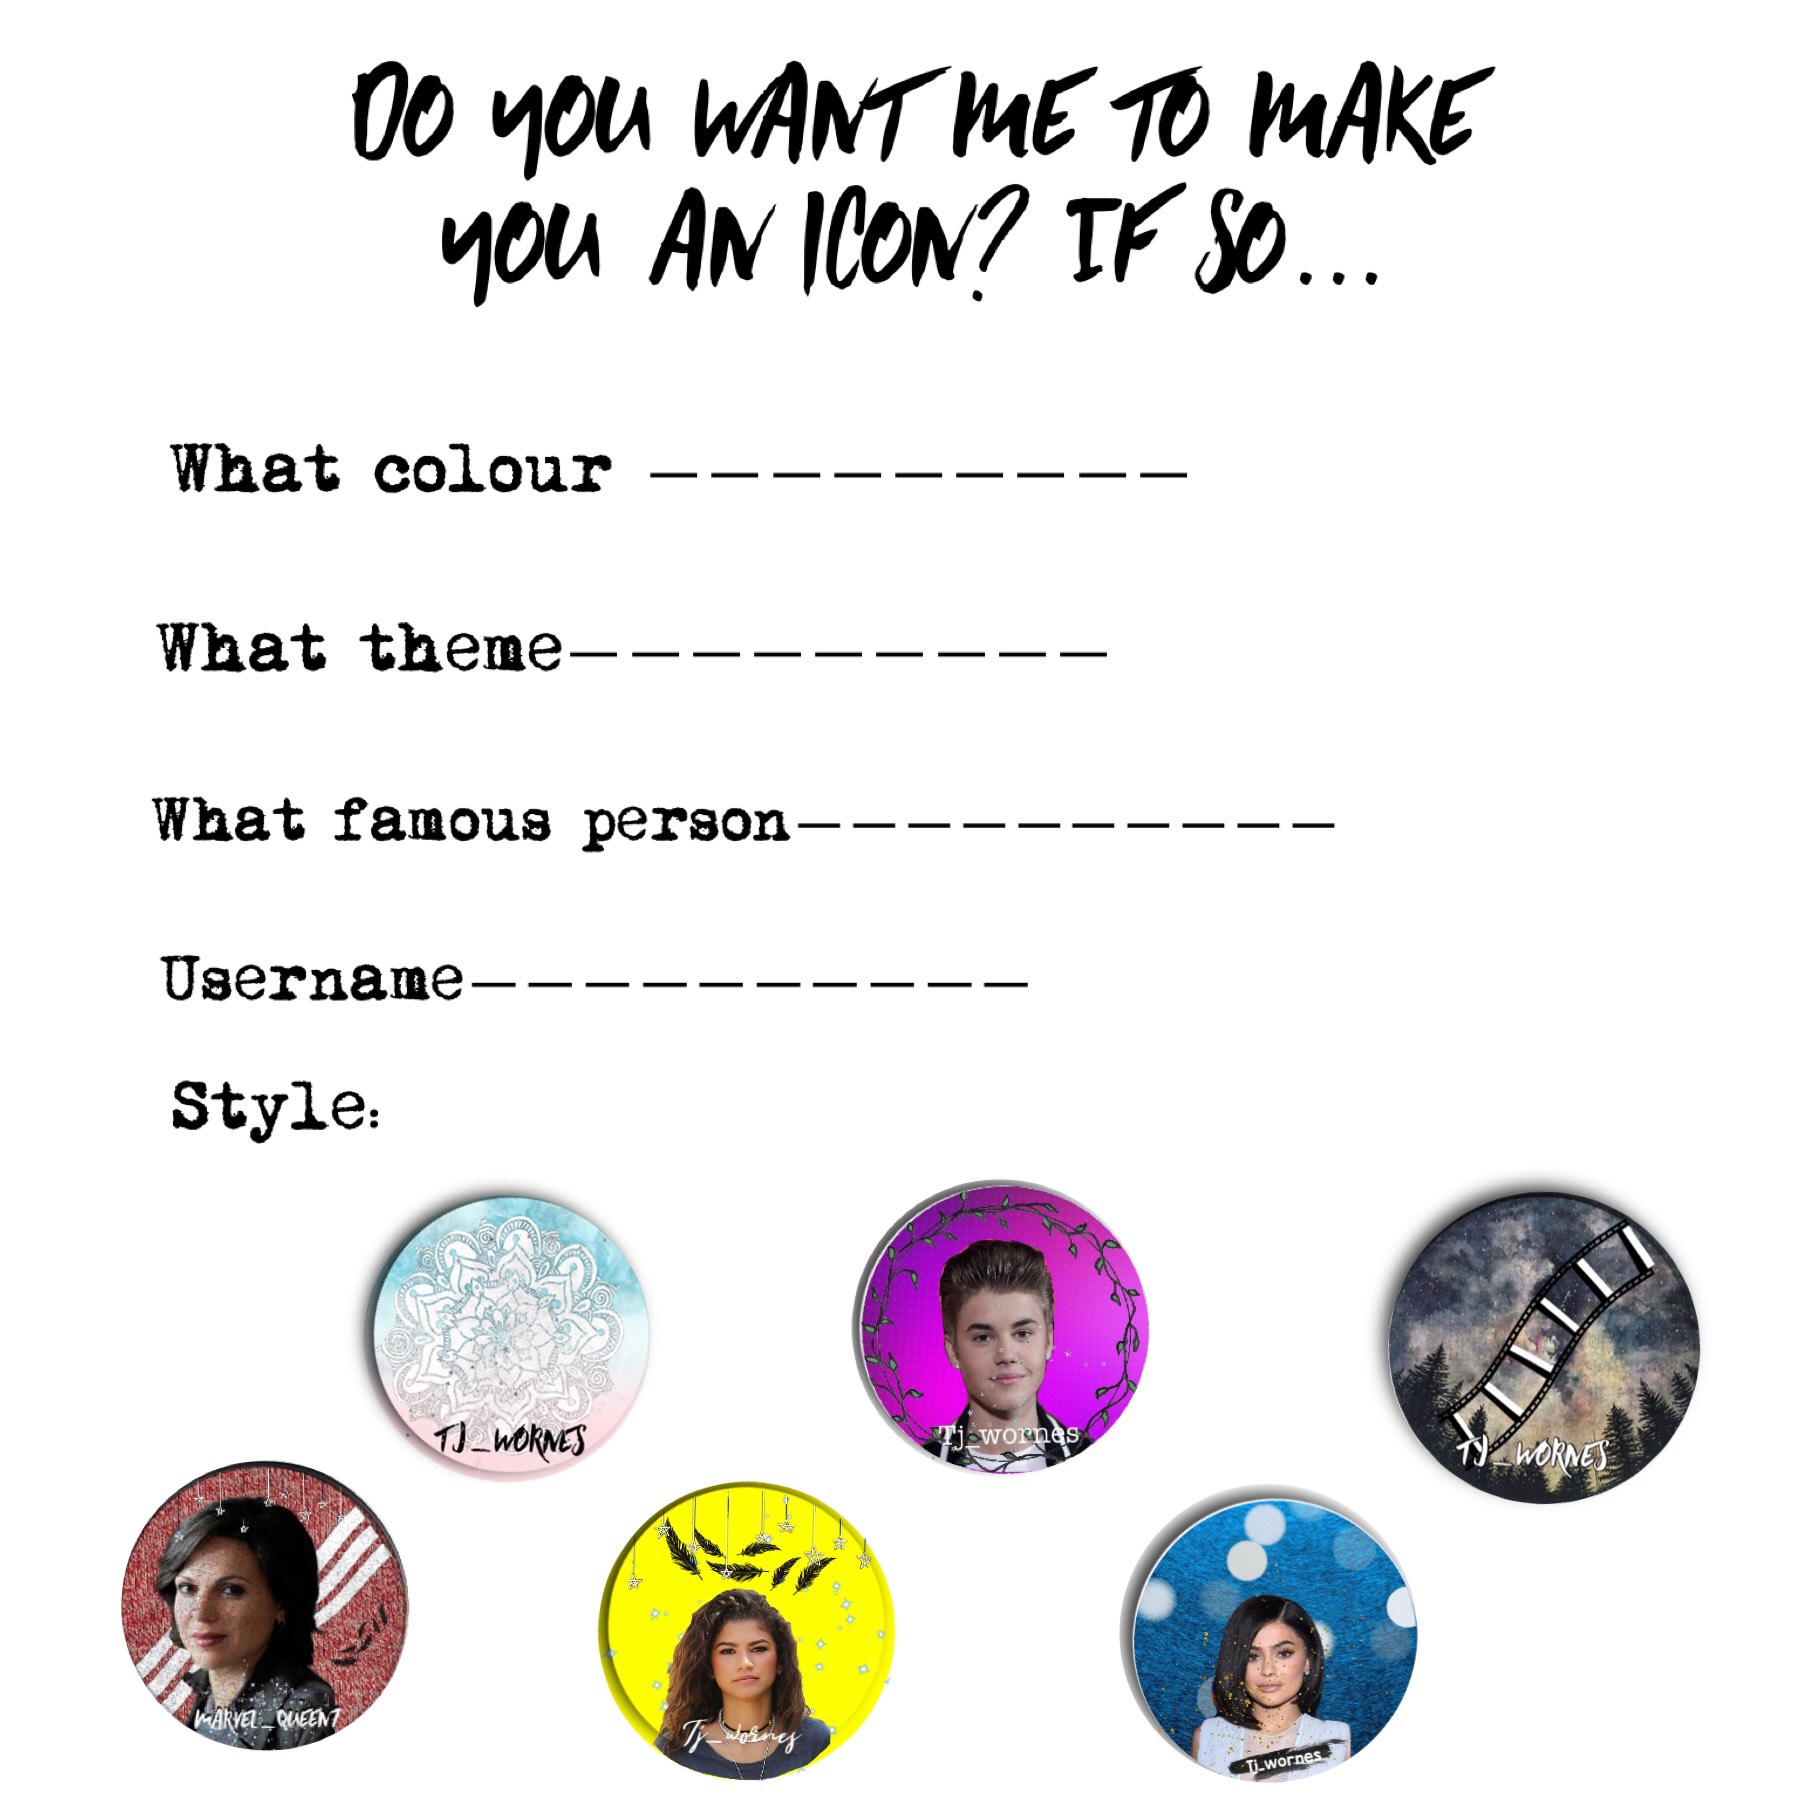 Want an icon? Fill in this post by remixing it. Inspired by @hopeful_editor14